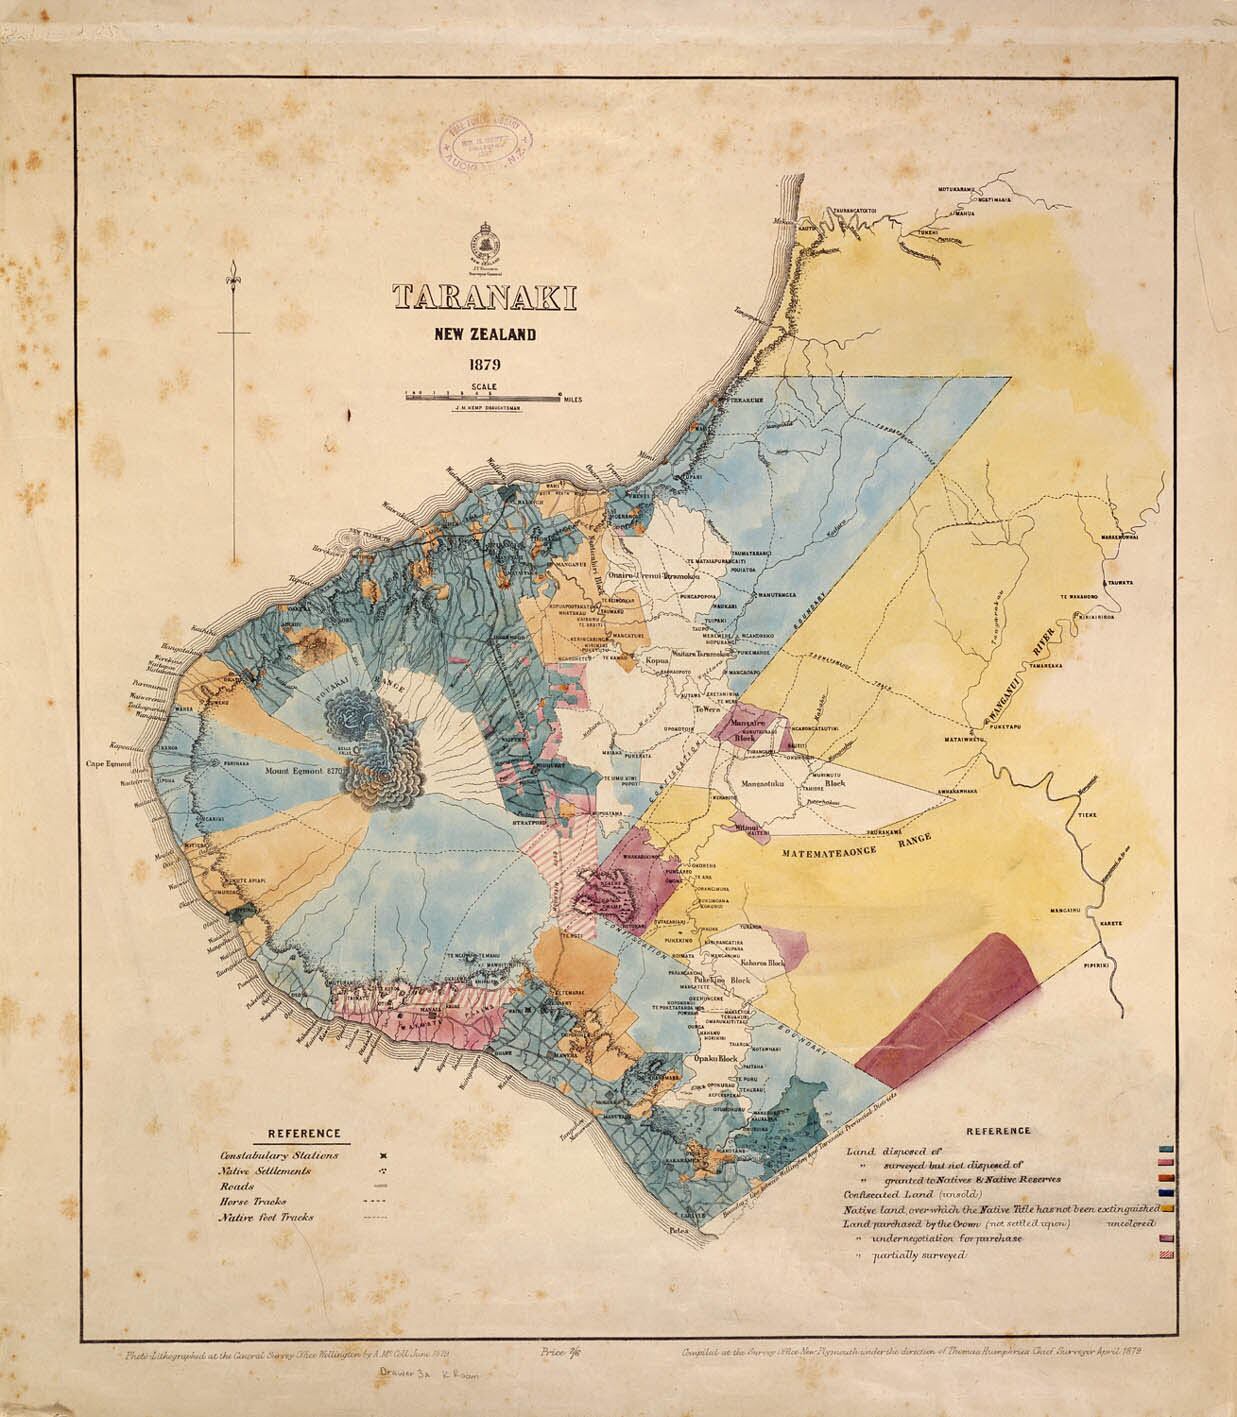 A proposed exclusion zone is based on the 45,000-acre Parihaka Block, originally surveyed by the crown in 1879.